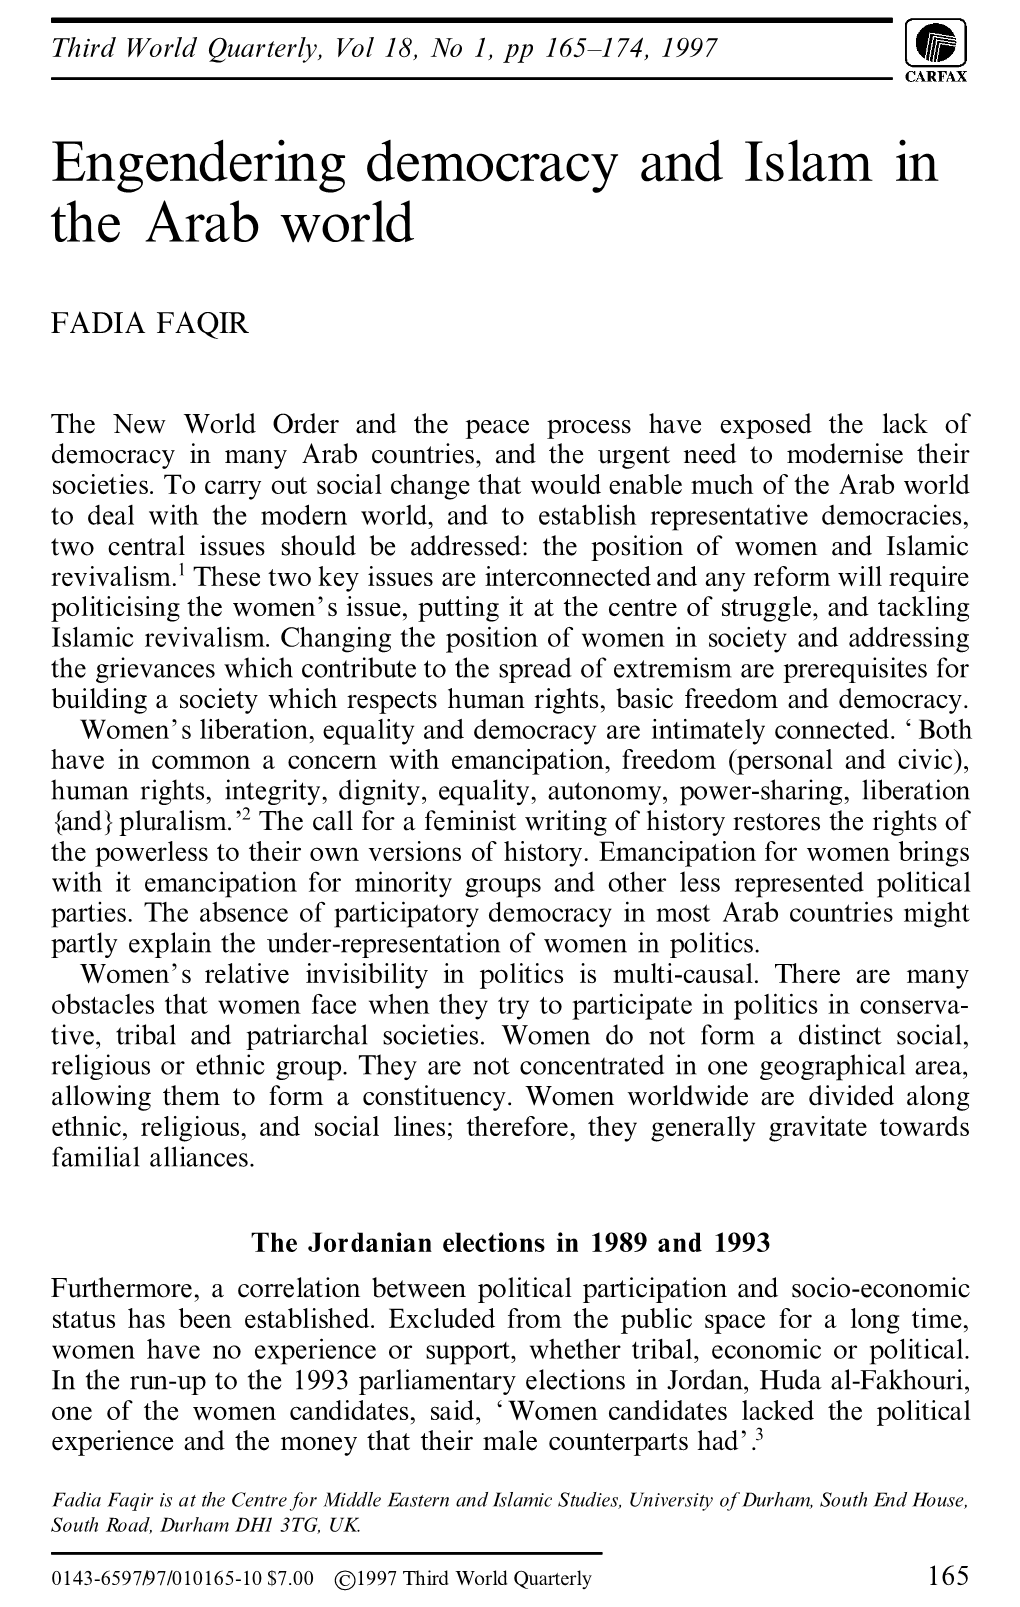 Engendering Democracy and Islam in the Arab World